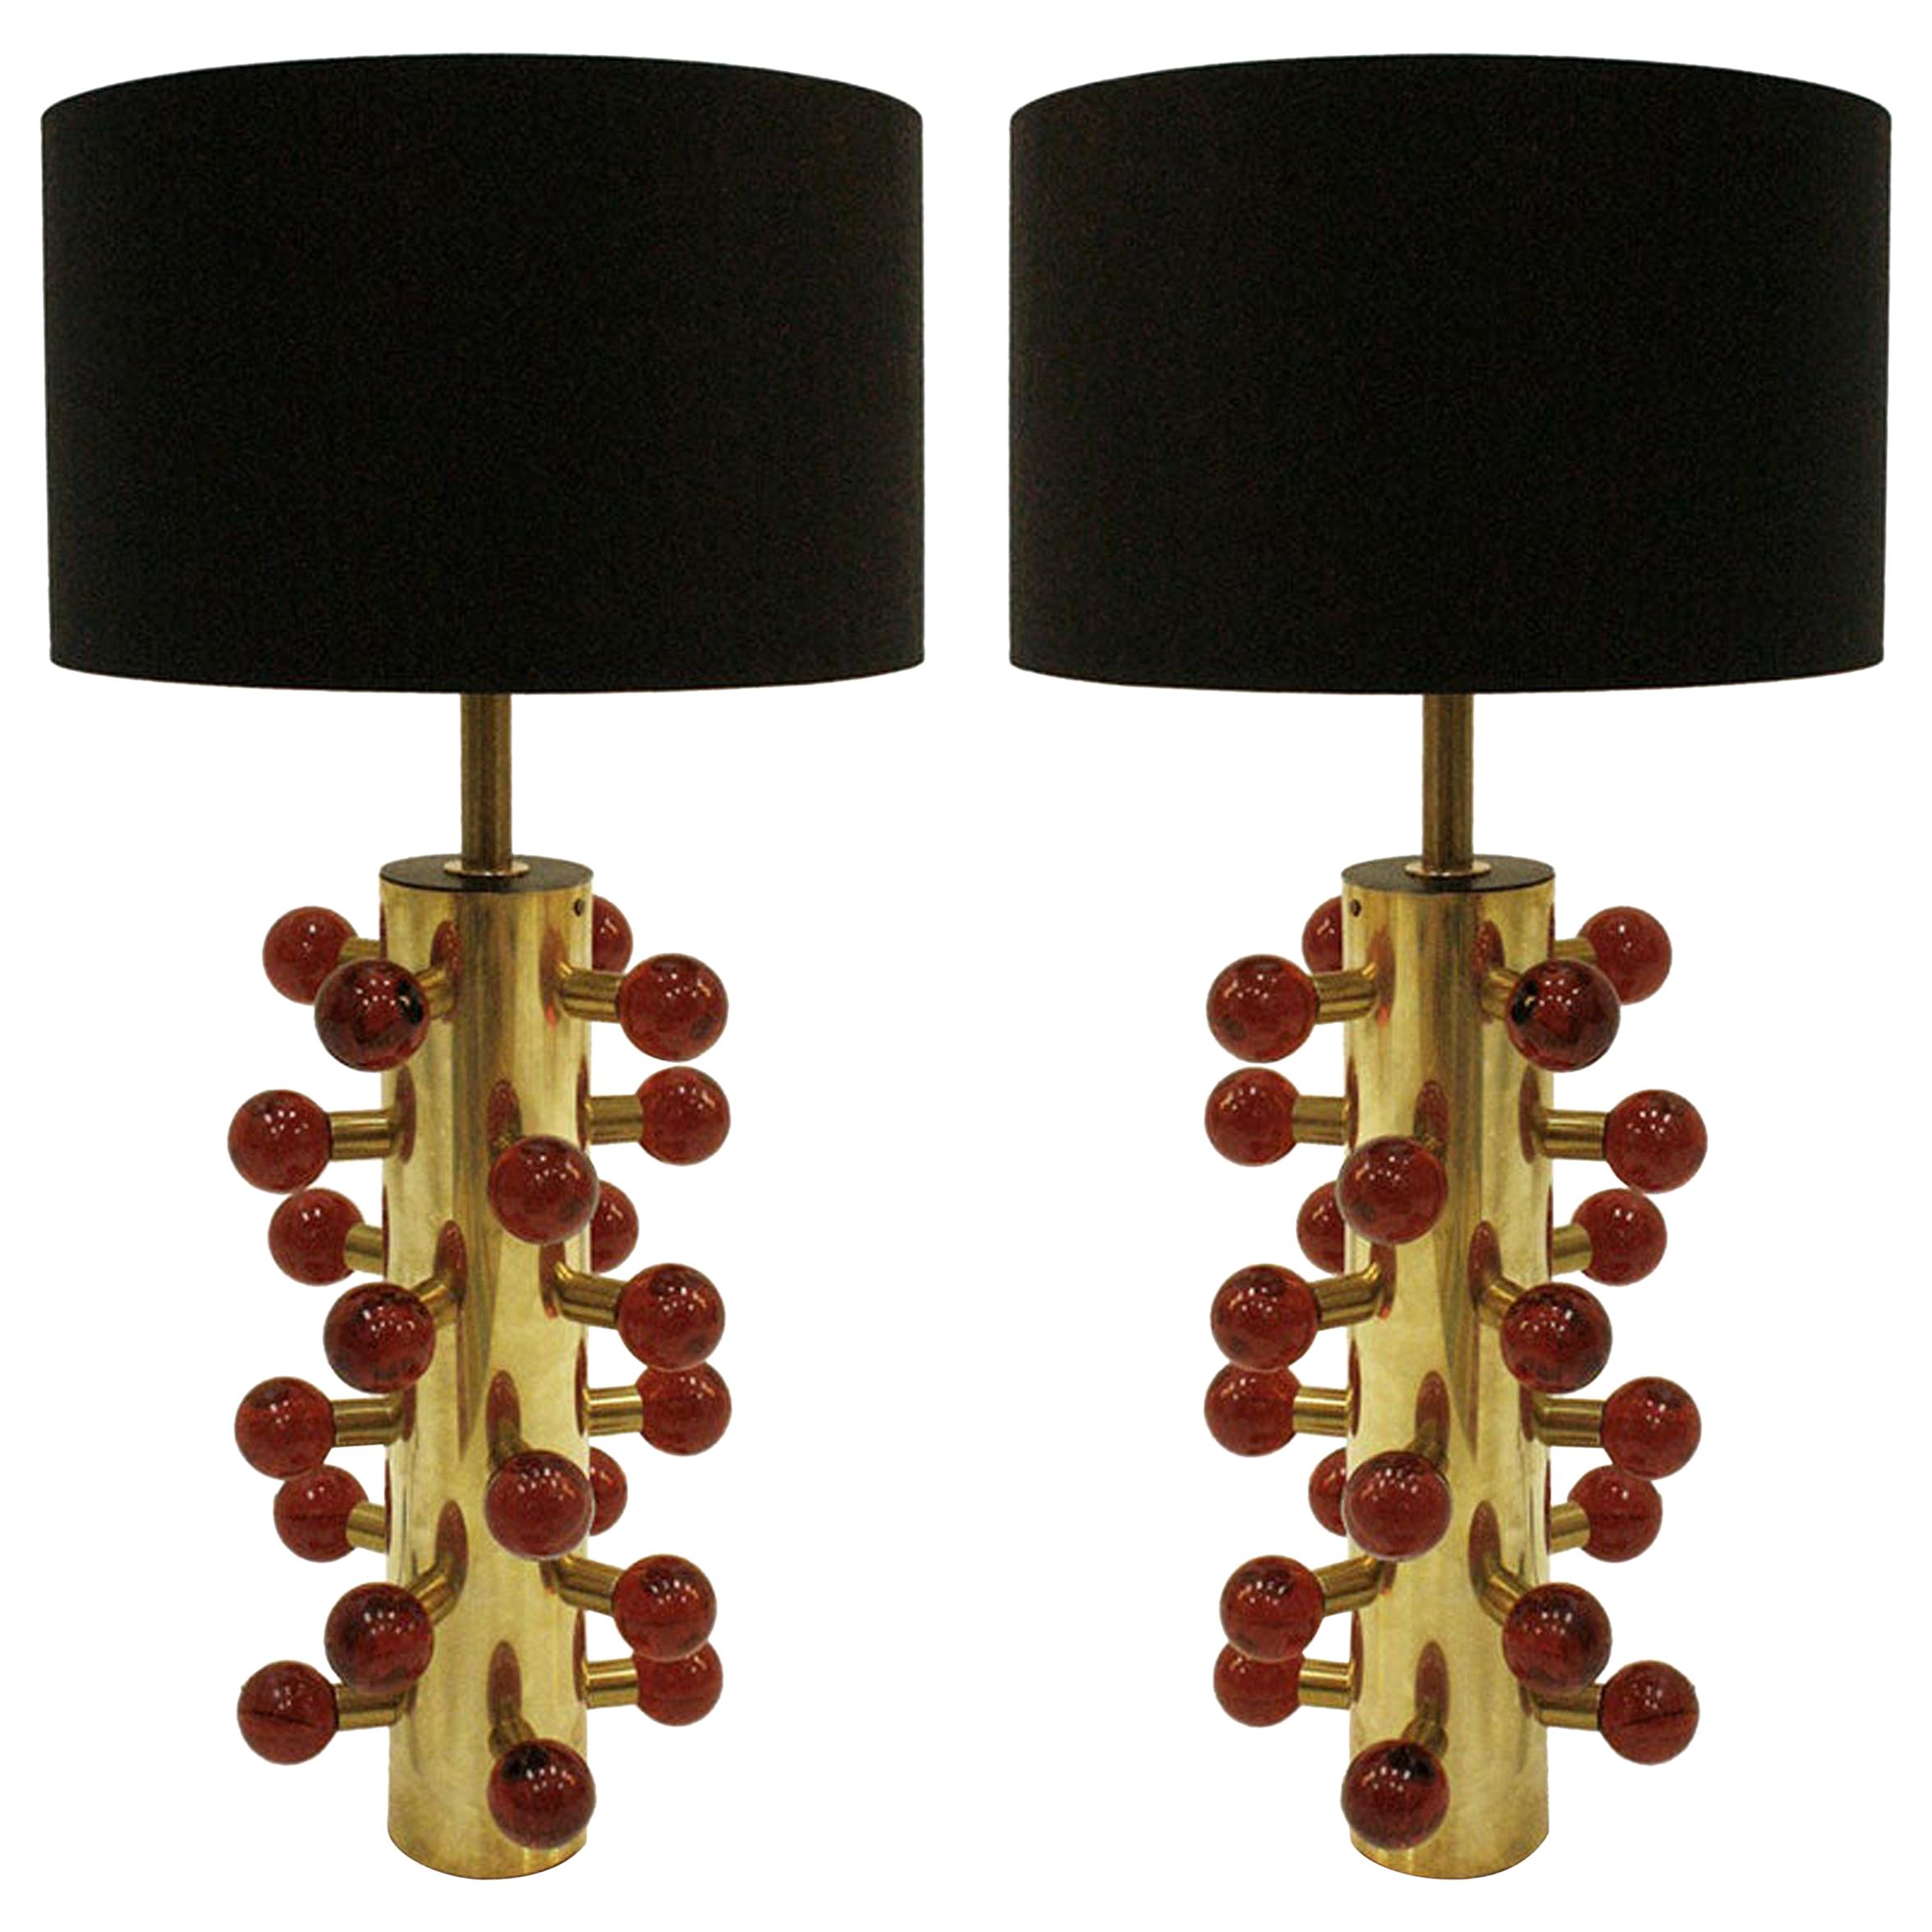 L.A. Studio Contemporary Modern Murano Glass and Brass Pair of Table Lamps